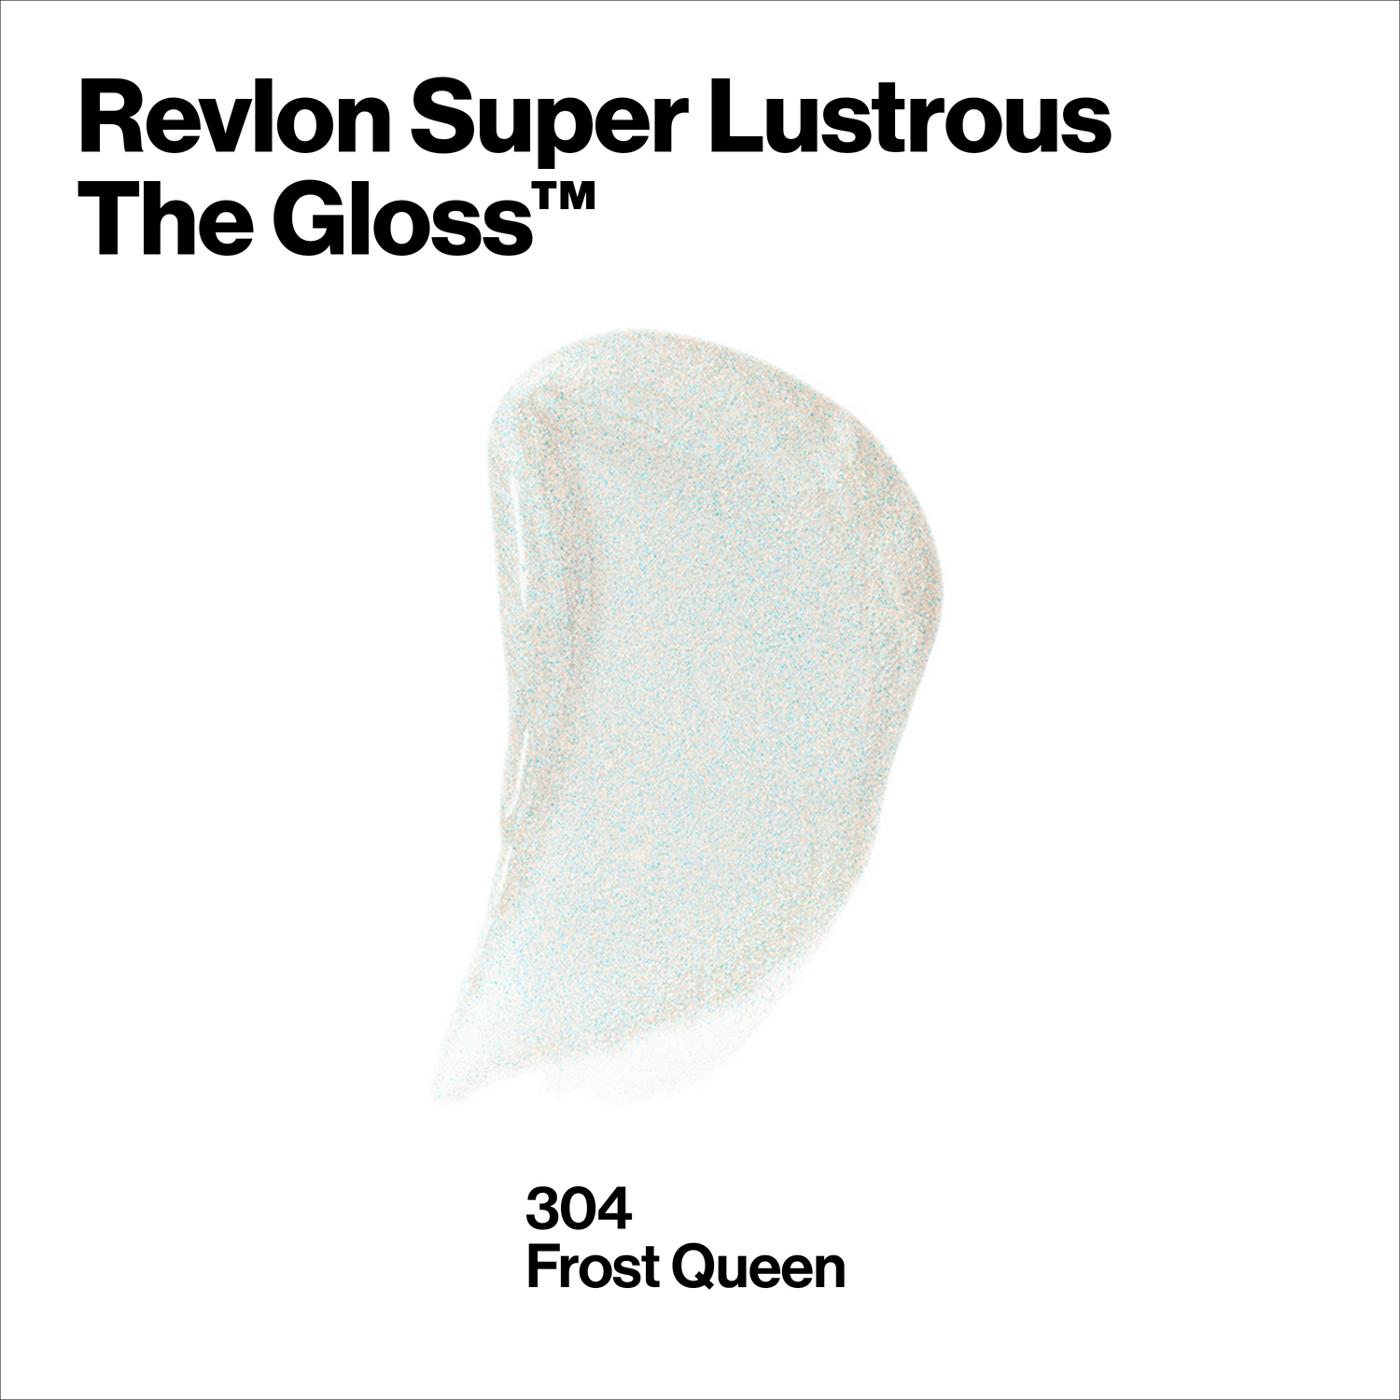 Revlon Super Lustrous The Gloss, 304 Frost Queen; image 7 of 7